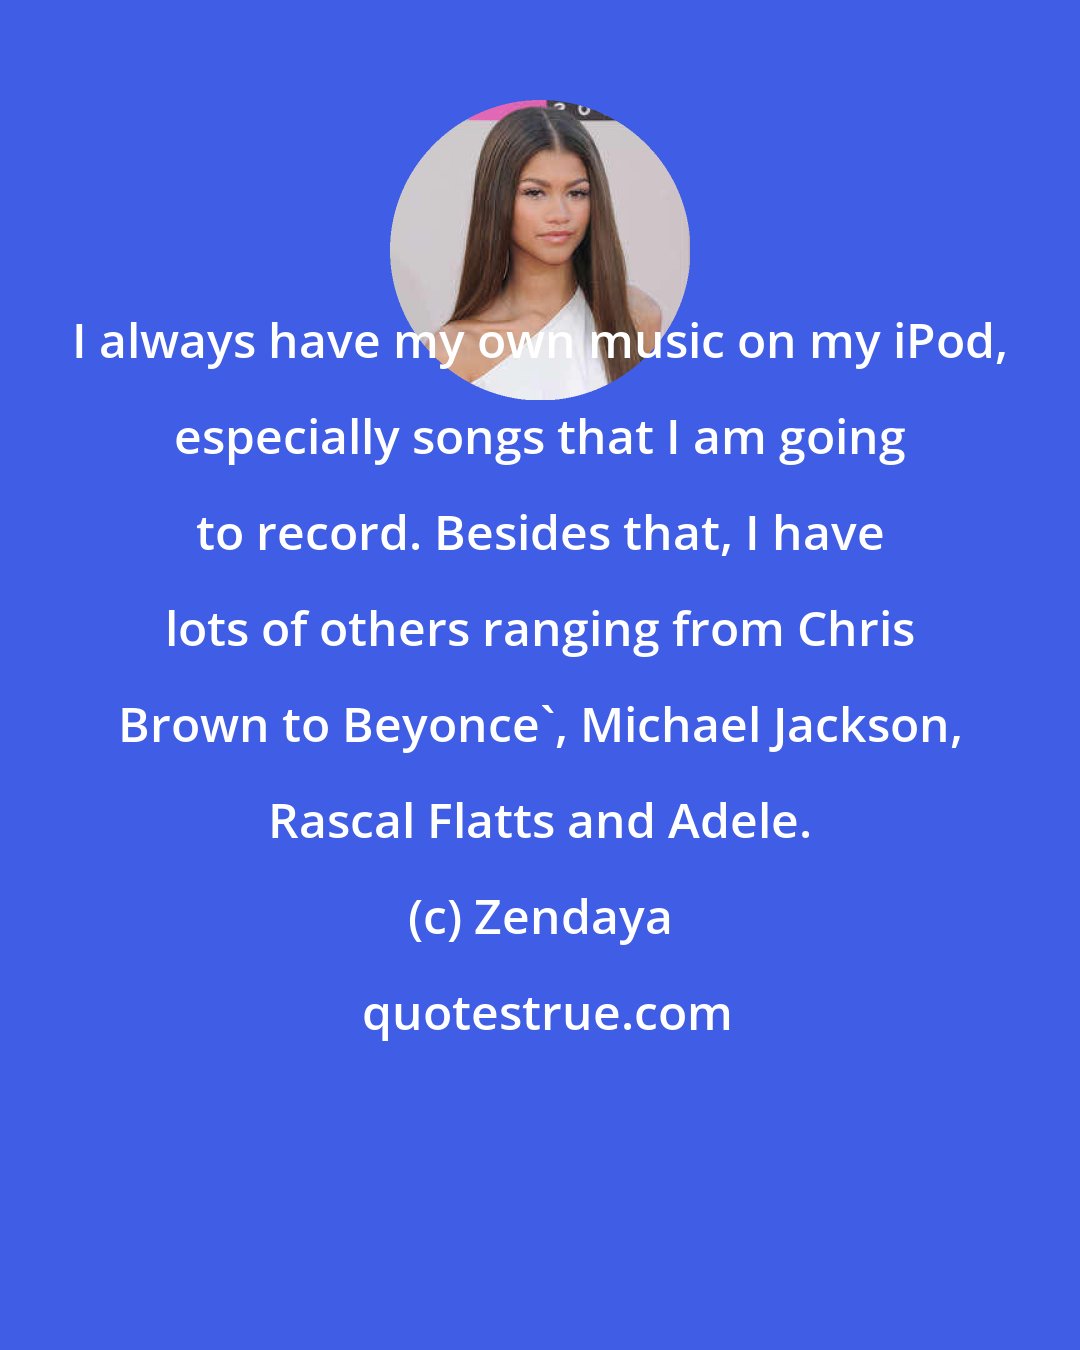 Zendaya: I always have my own music on my iPod, especially songs that I am going to record. Besides that, I have lots of others ranging from Chris Brown to Beyonce', Michael Jackson, Rascal Flatts and Adele.